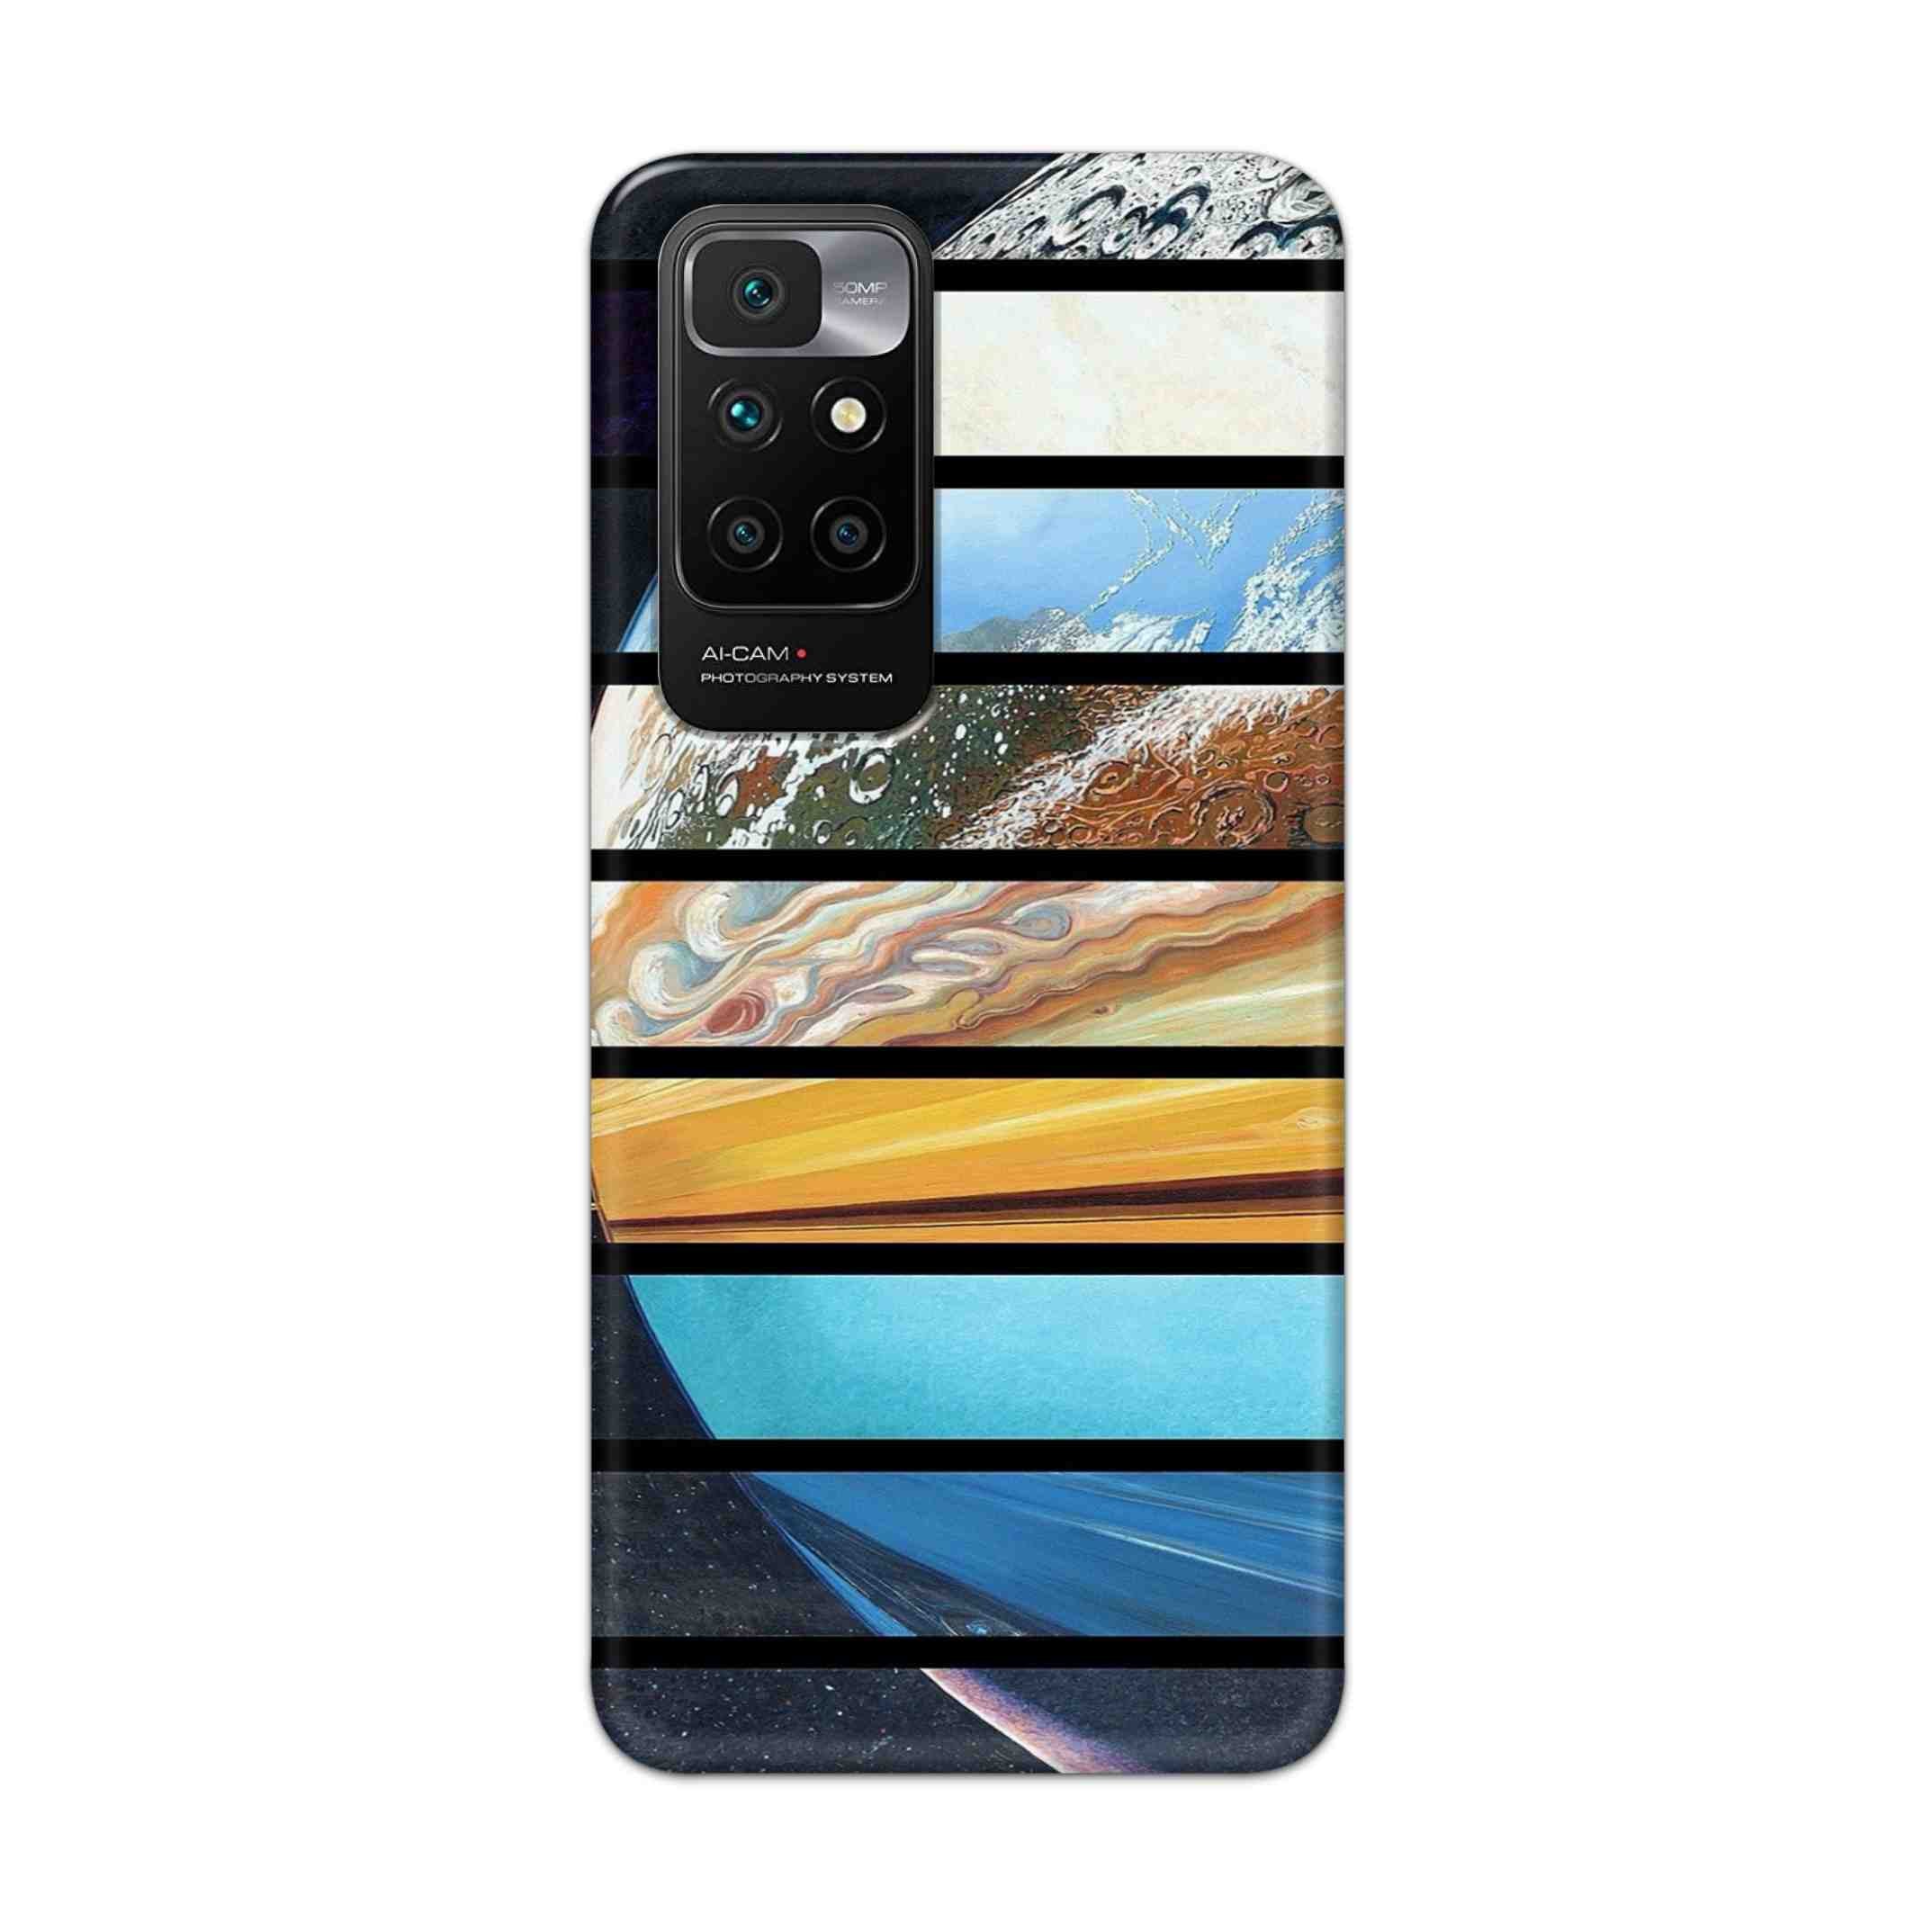 Buy Colourful Earth Hard Back Mobile Phone Case Cover For Redmi 10 Prime Online